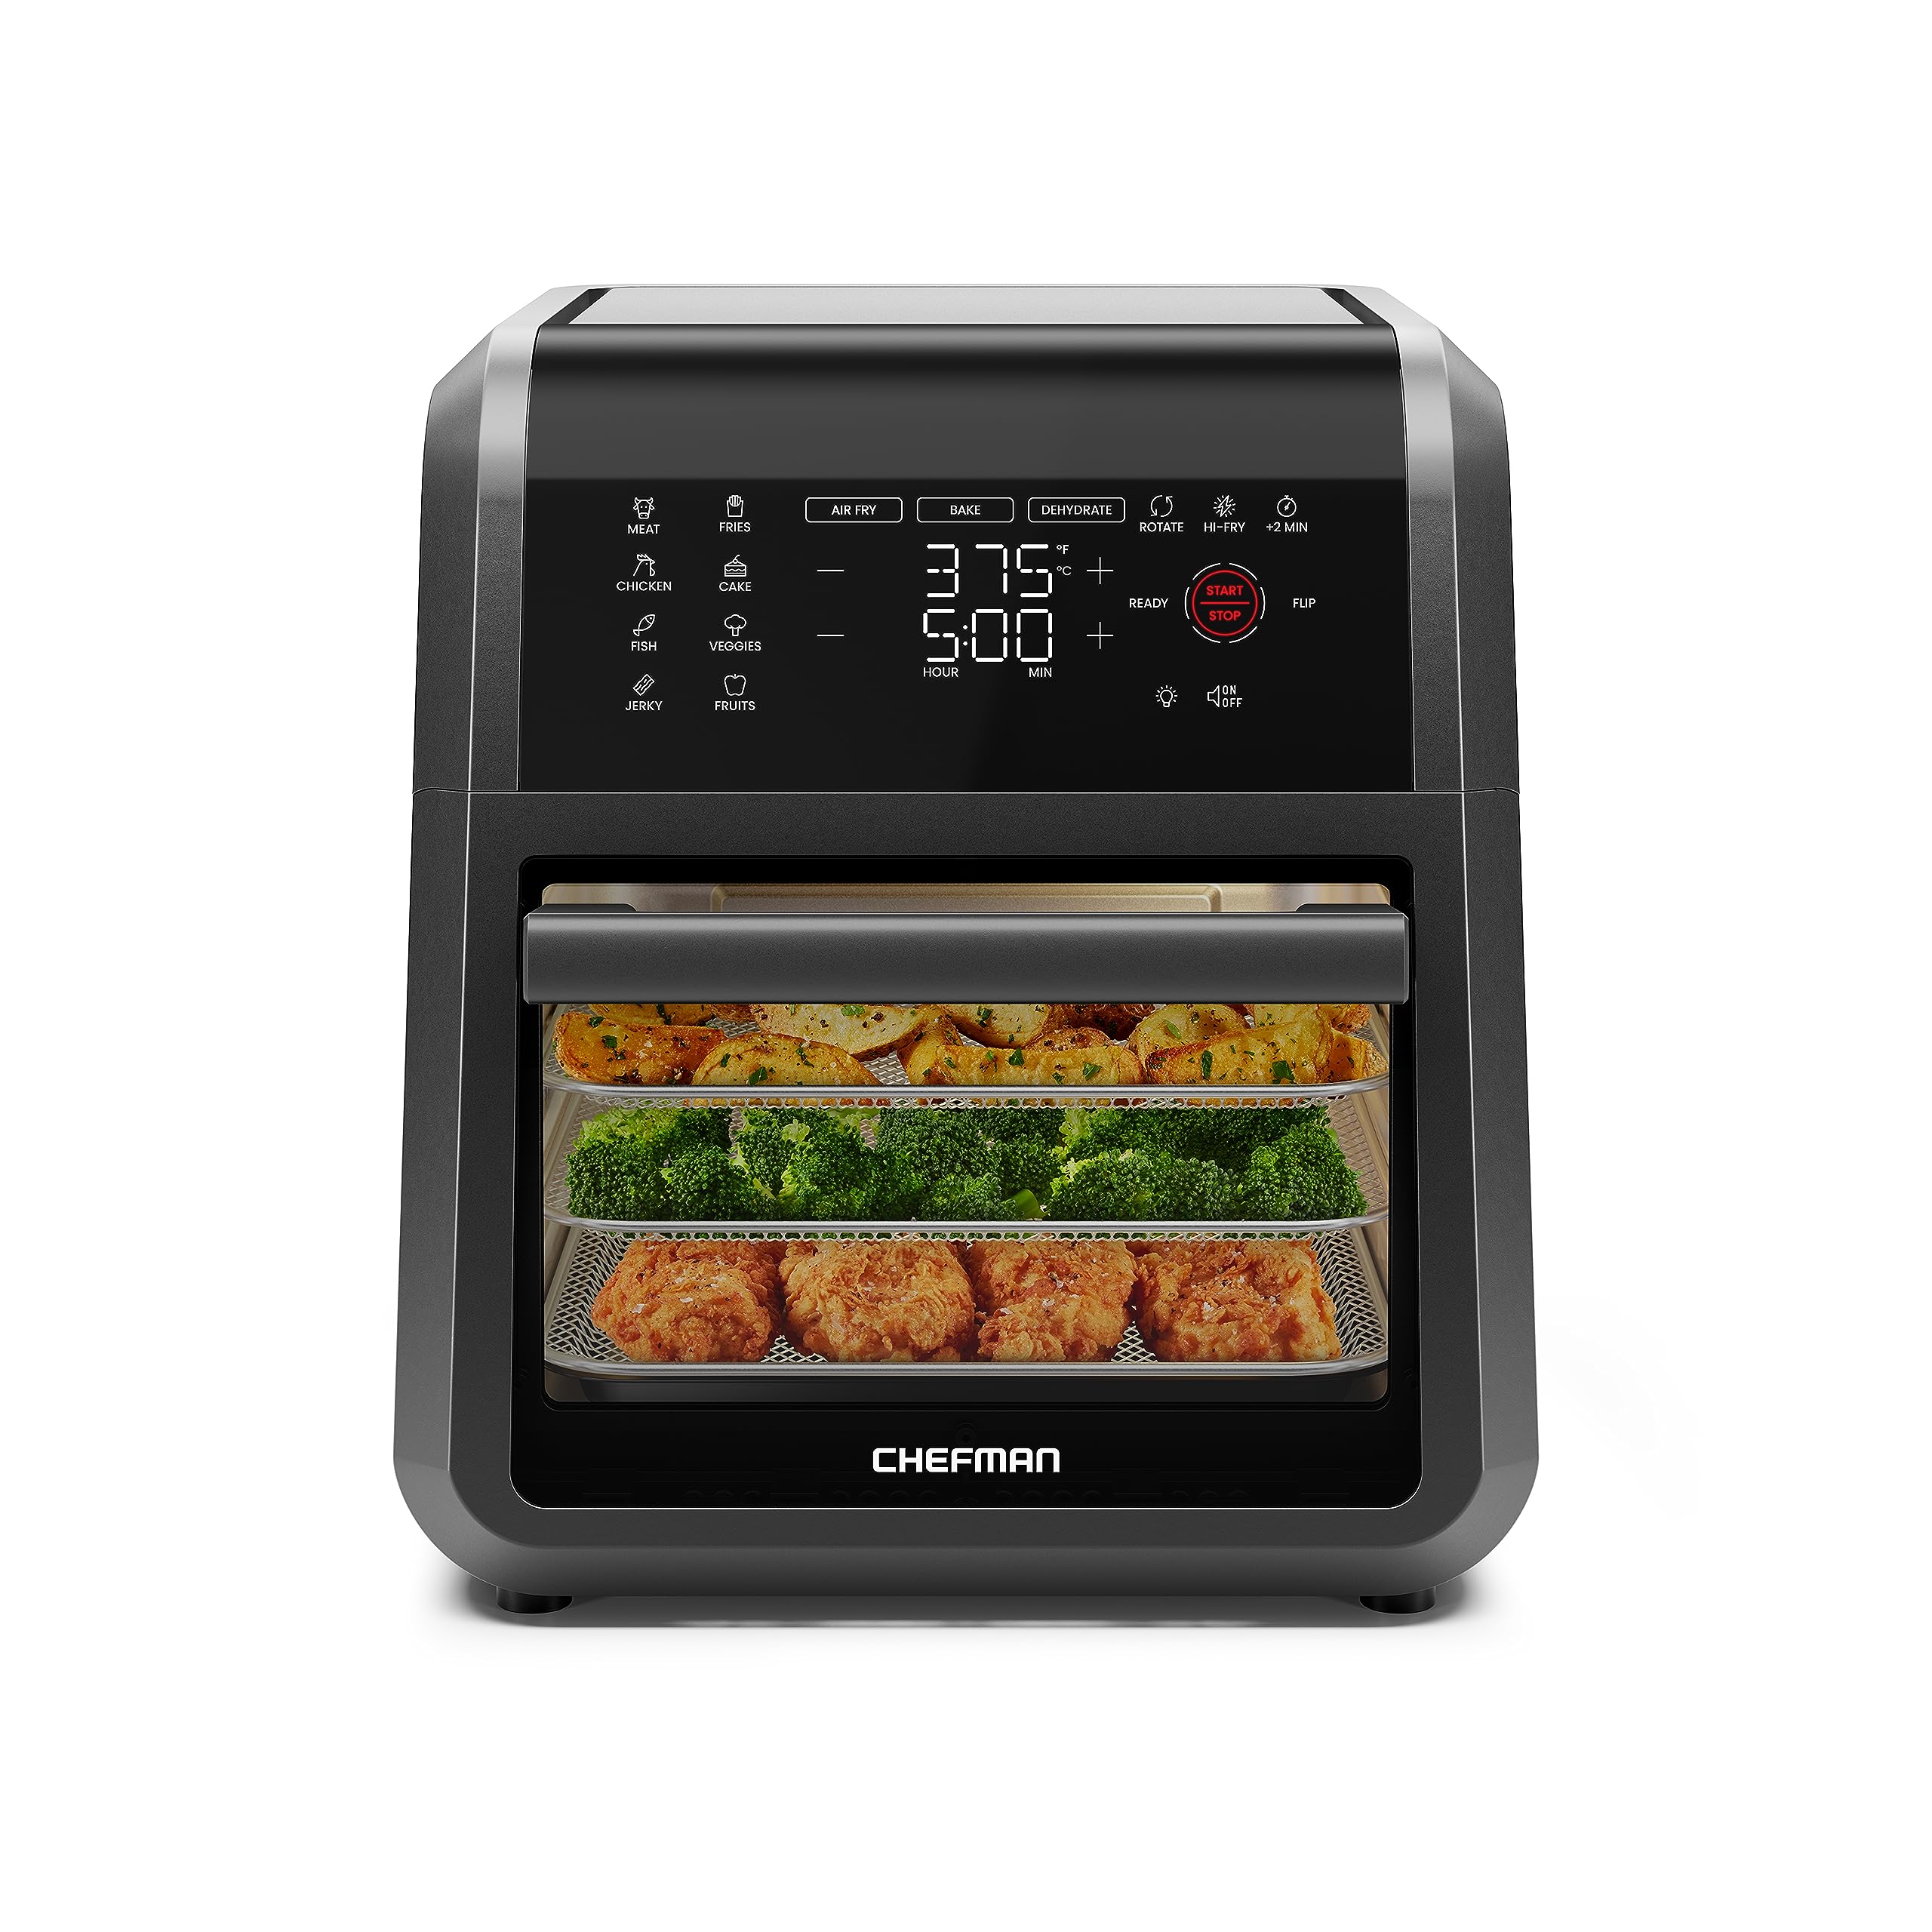 Chefman Air Fryer Oven - 12-Quart 6-in-1 Rotisserie Oven and Dehydrator, 12 Presets with Digital Timer and Touchscreen, Family Size XL Airfryer Countertop Convection Oven, Dishwasher-Safe Parts, Black